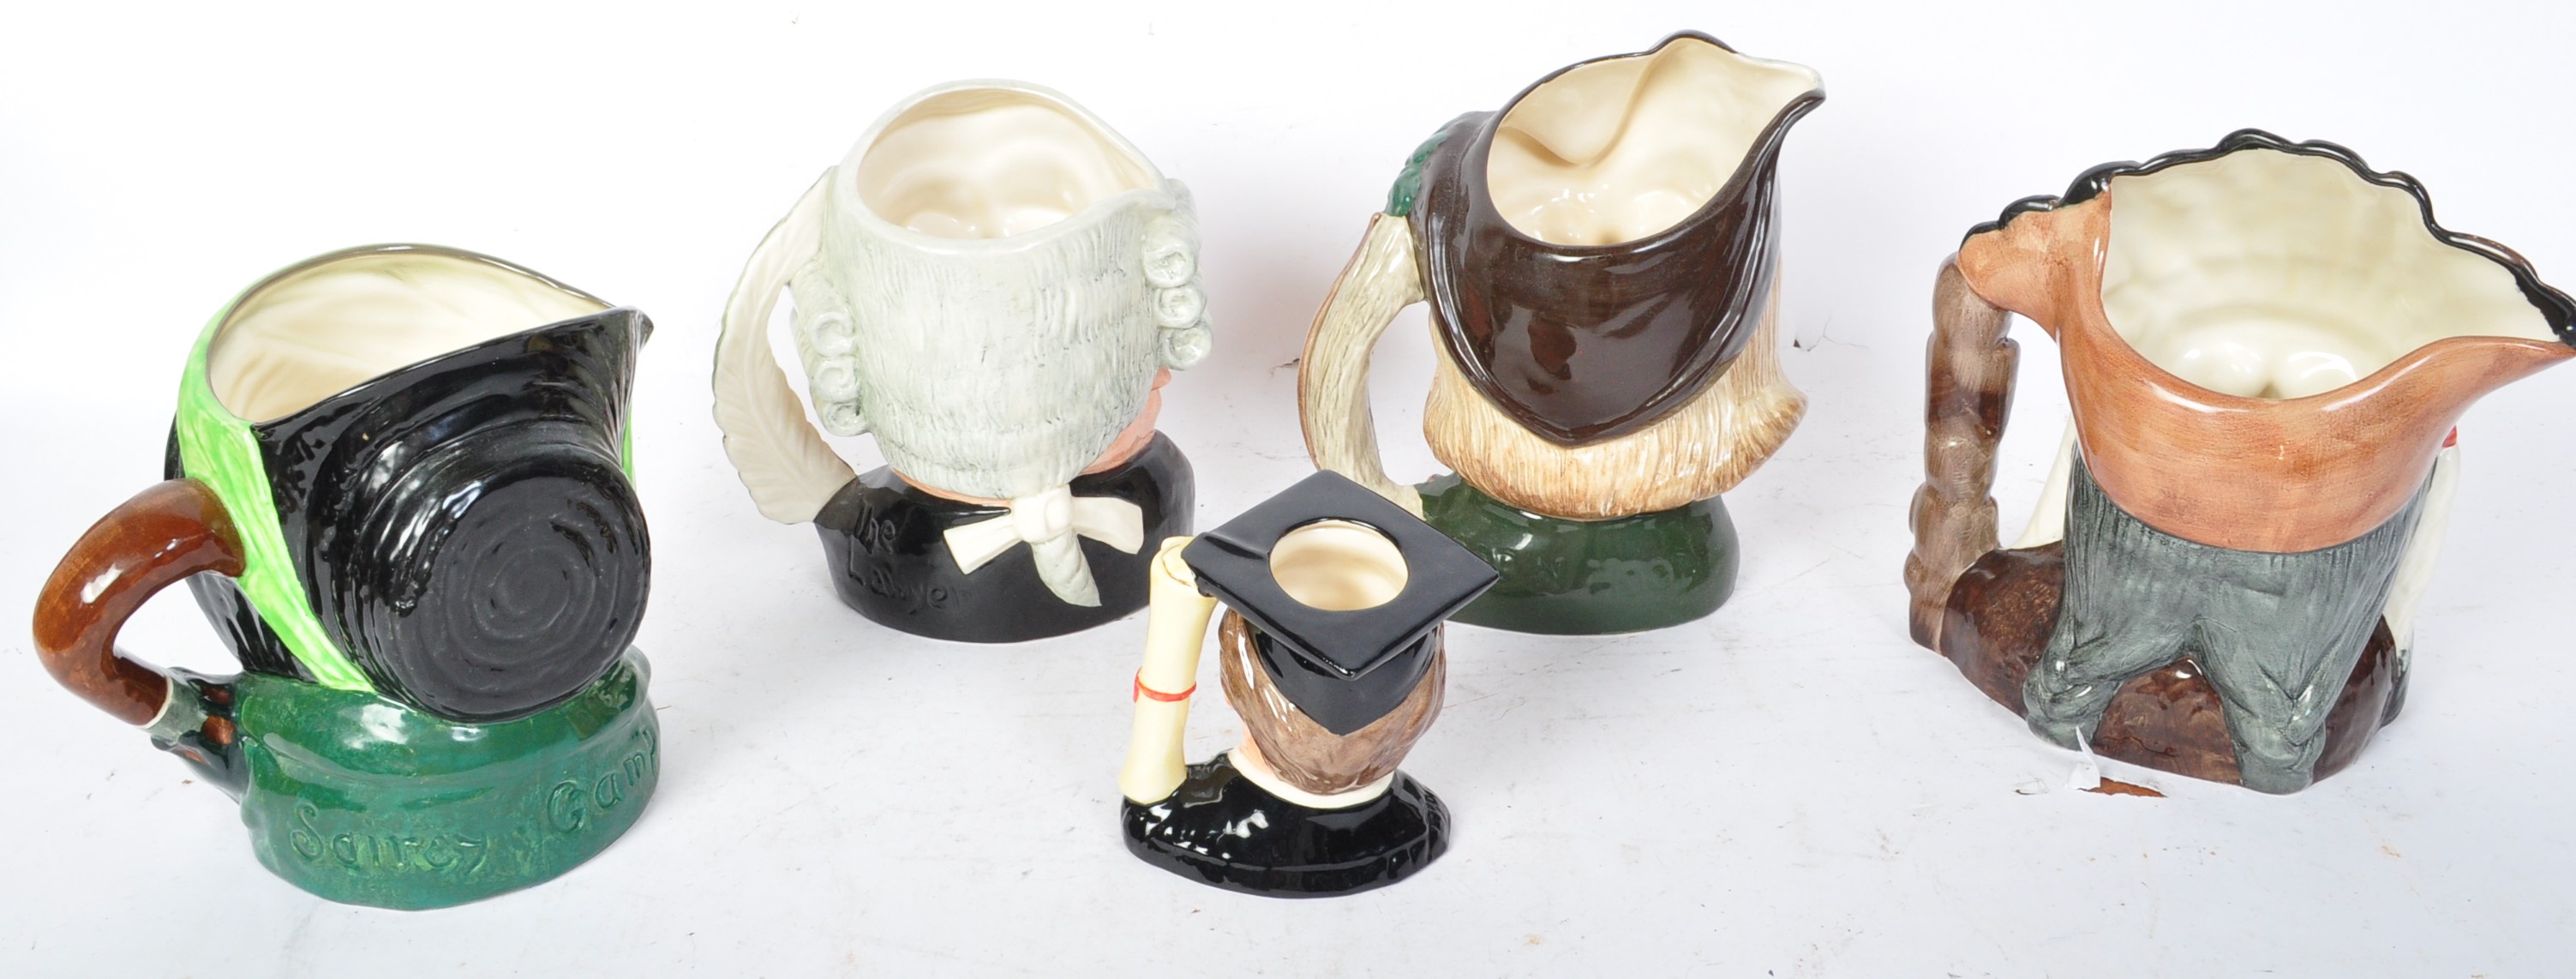 A COLLECTION OF FIVE VINTAGE ROYAL DOULTON TOBY JUGS - Image 5 of 8